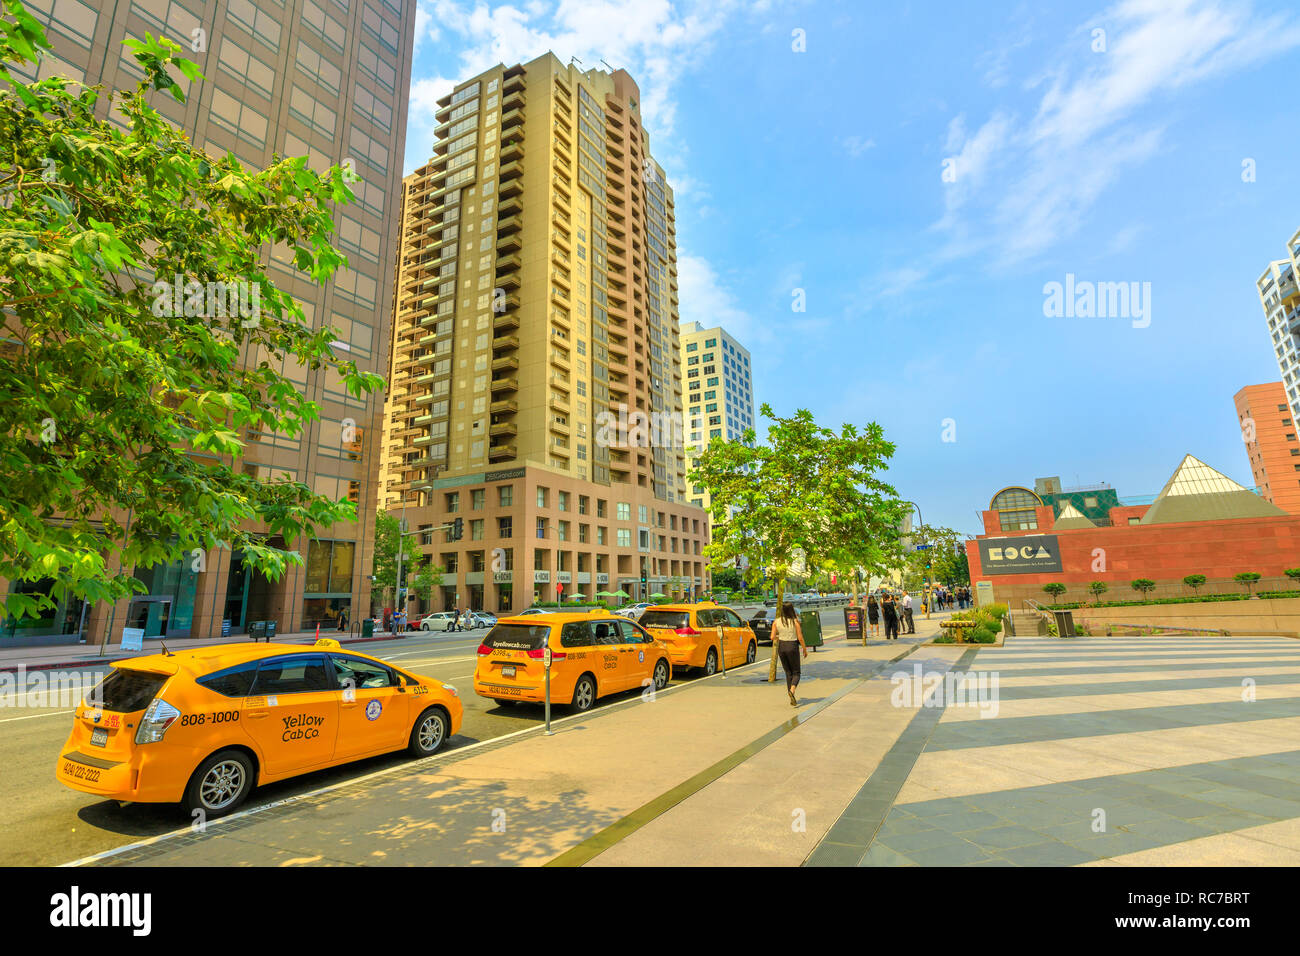 Los Angeles, California, United States - August 9, 2018: row of taxis on Grand Avenue in downtown Los Angeles, next to MOCA, the Museum of Contemporary Art in L.A. Blue sky in a sunny day. Stock Photo